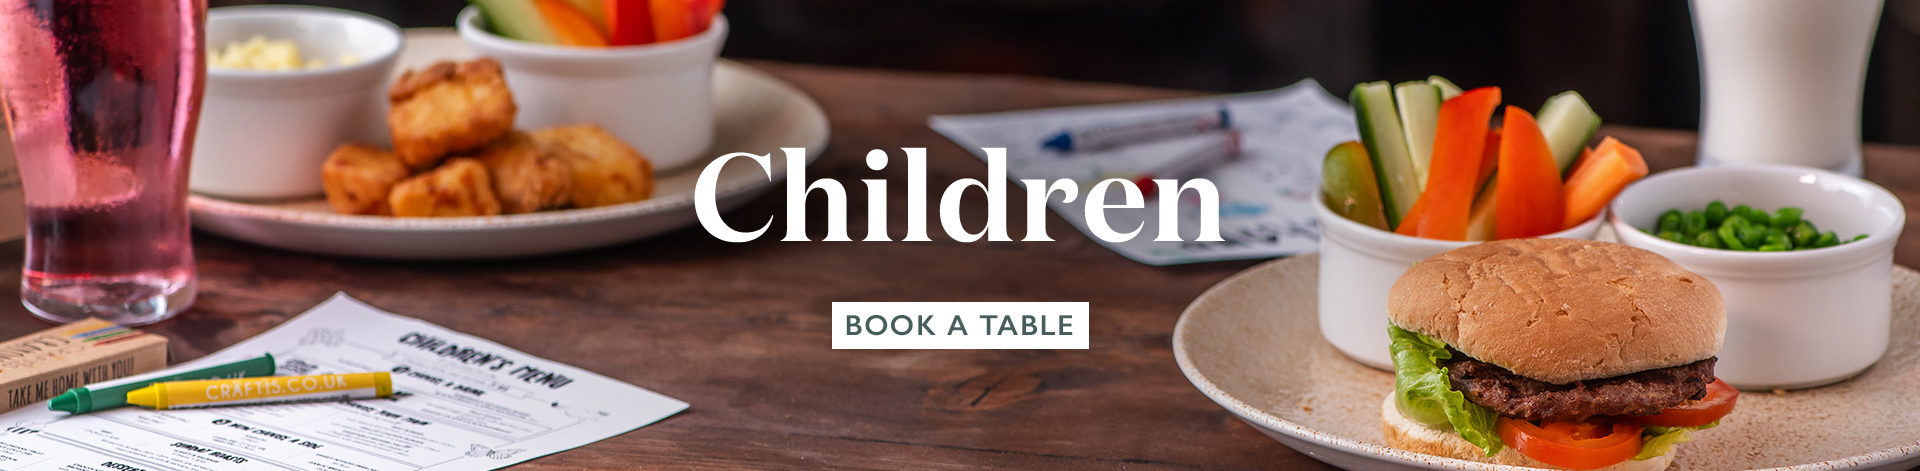 Children's Menu at The Hesketh Arms